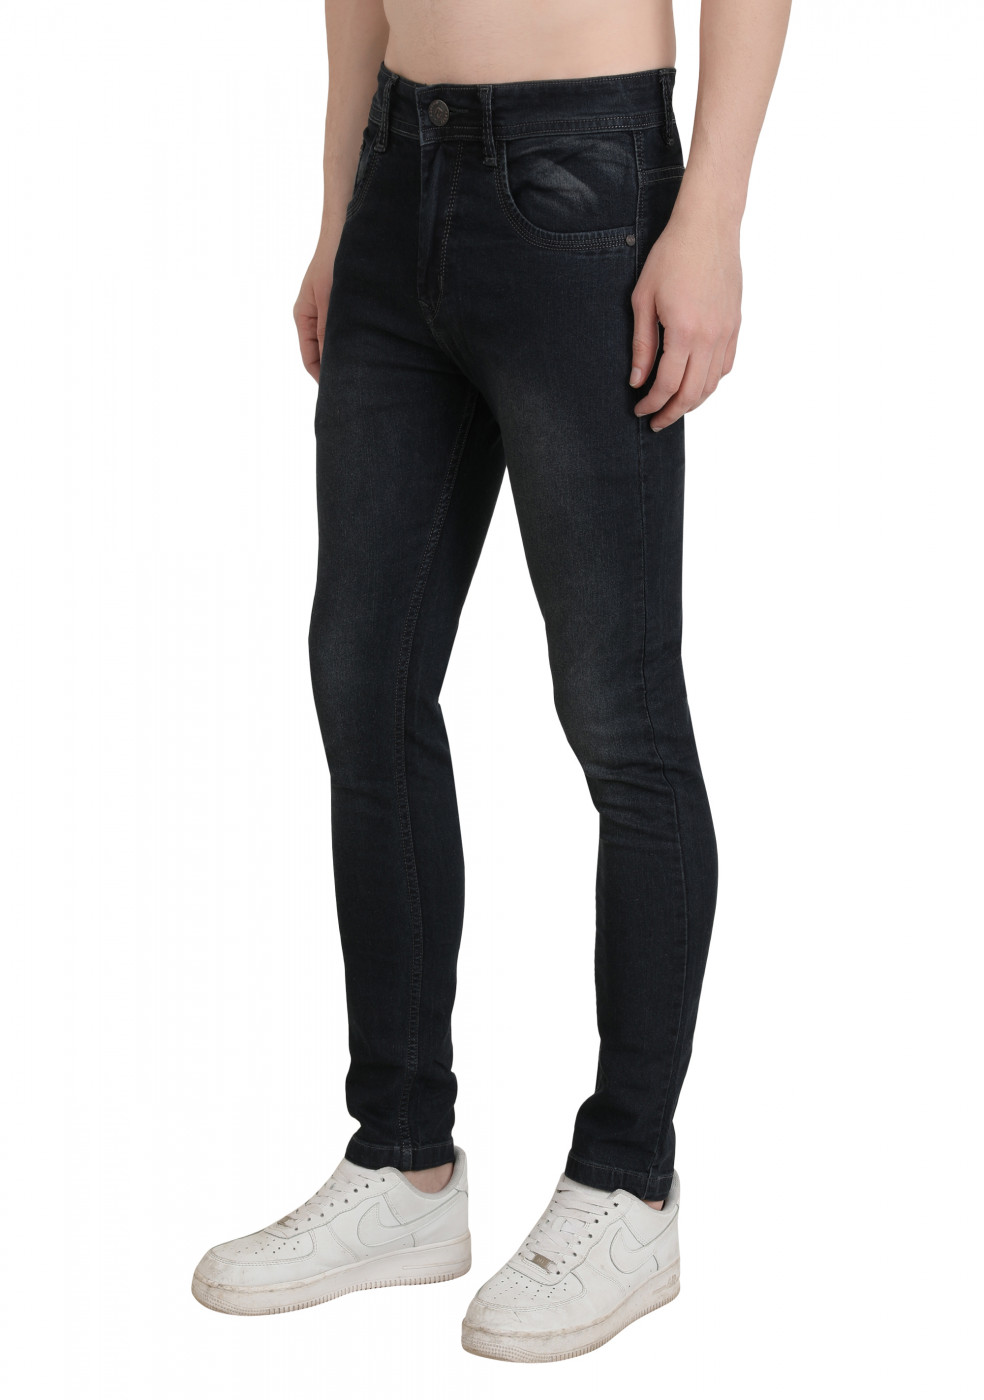 Stylish Slim Fit Gray Jeans For Men